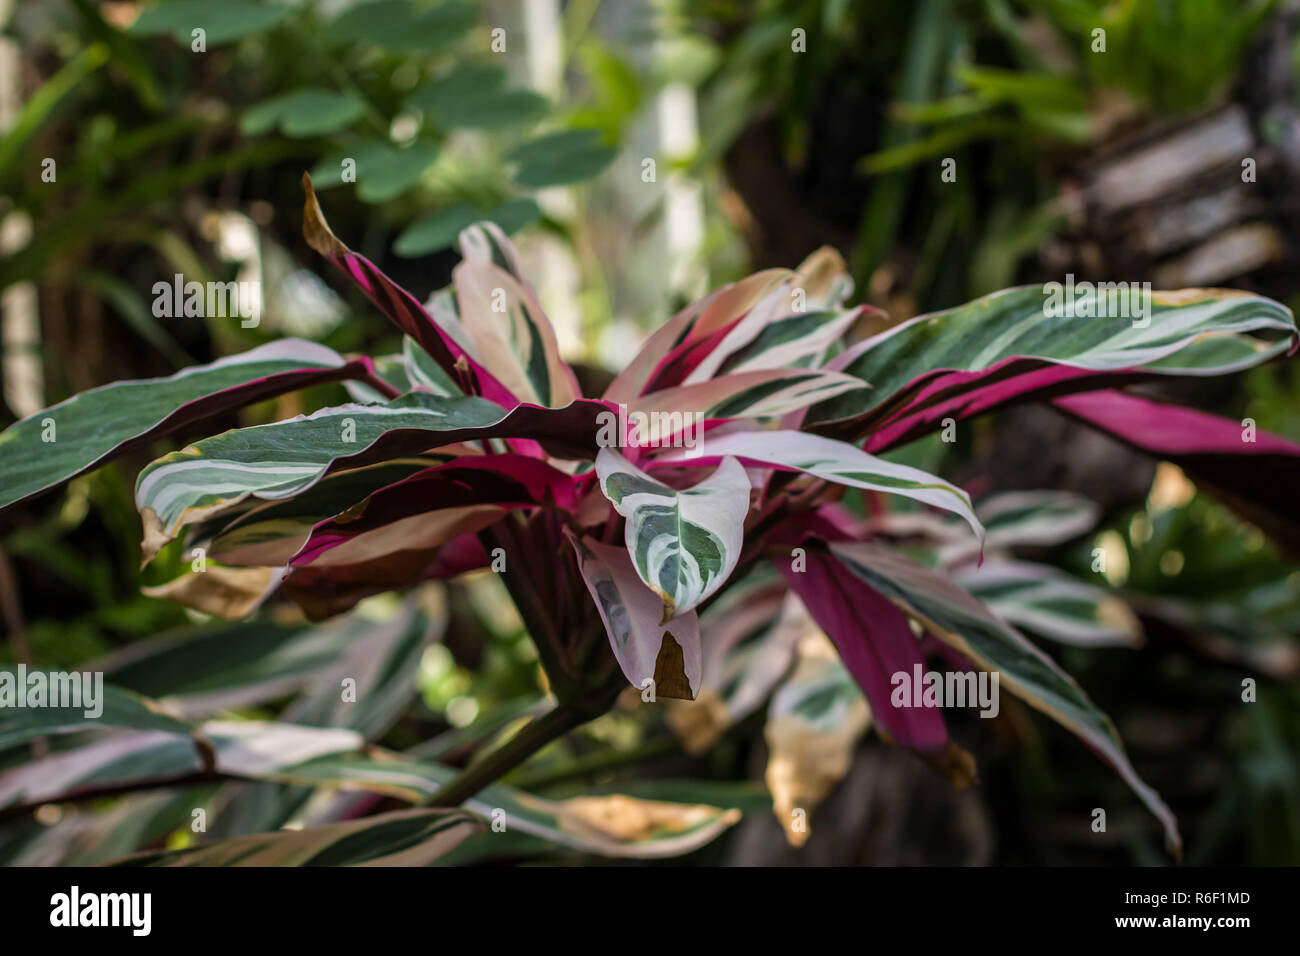 Leaves of Stromanthe sanguinea in ghe green house Stock Photo